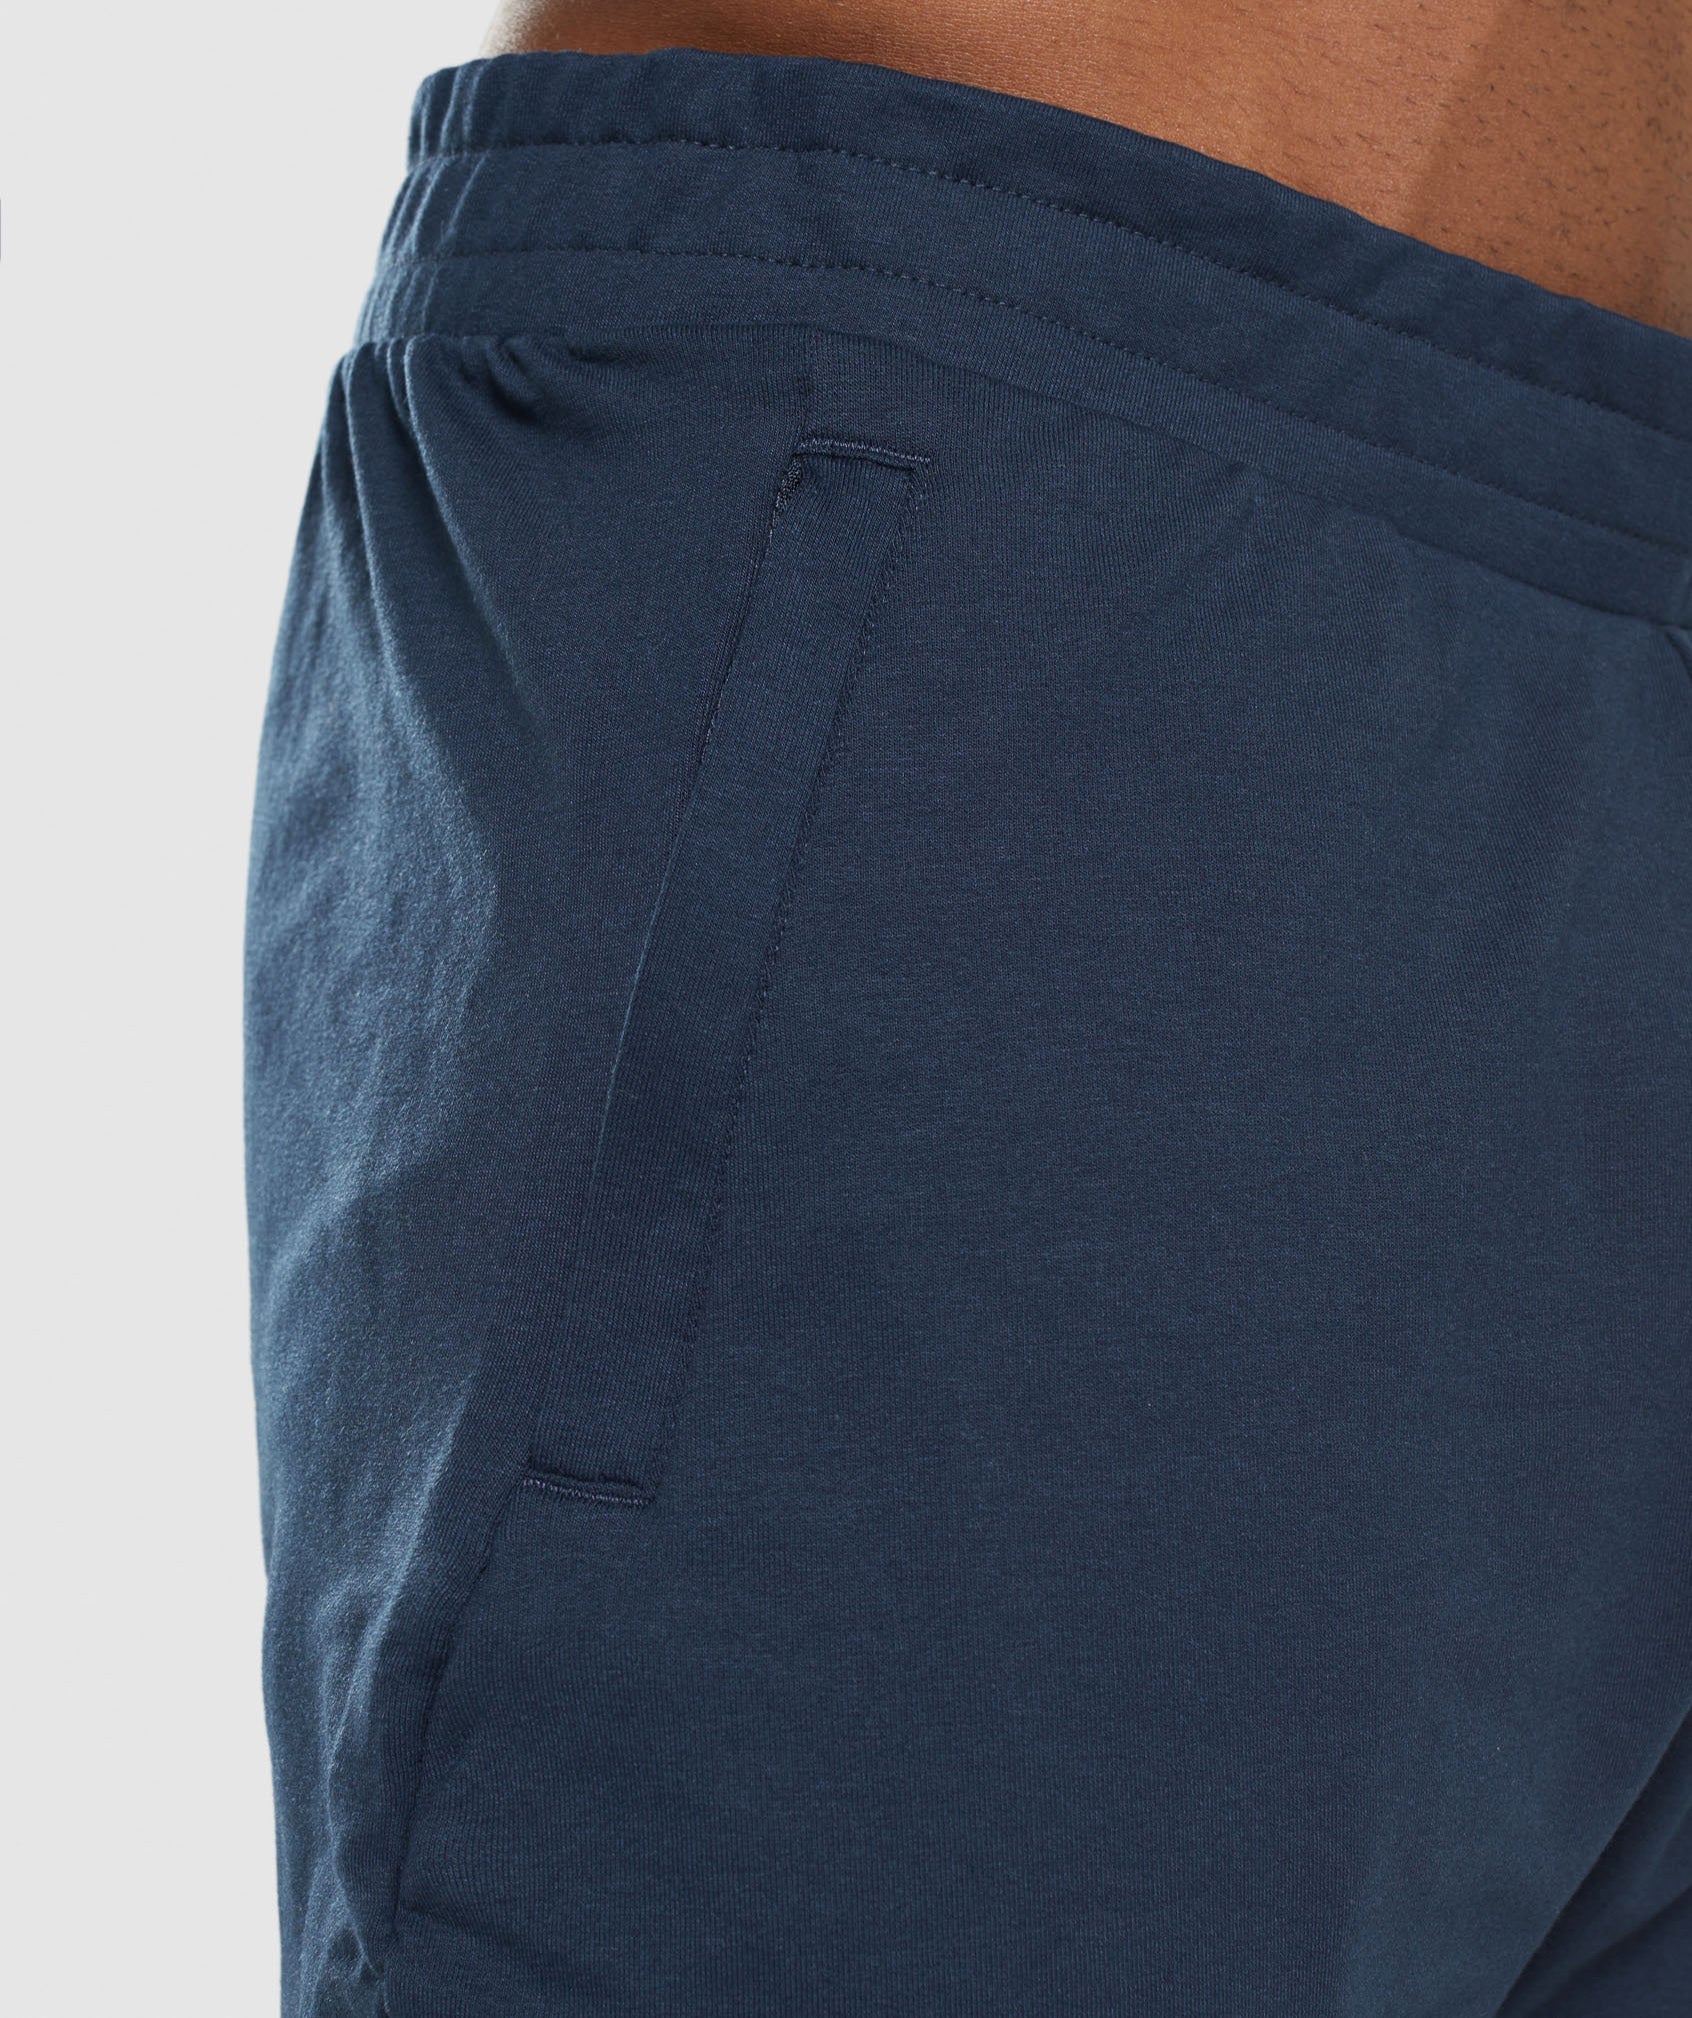 Critical Pant in Navy - view 6